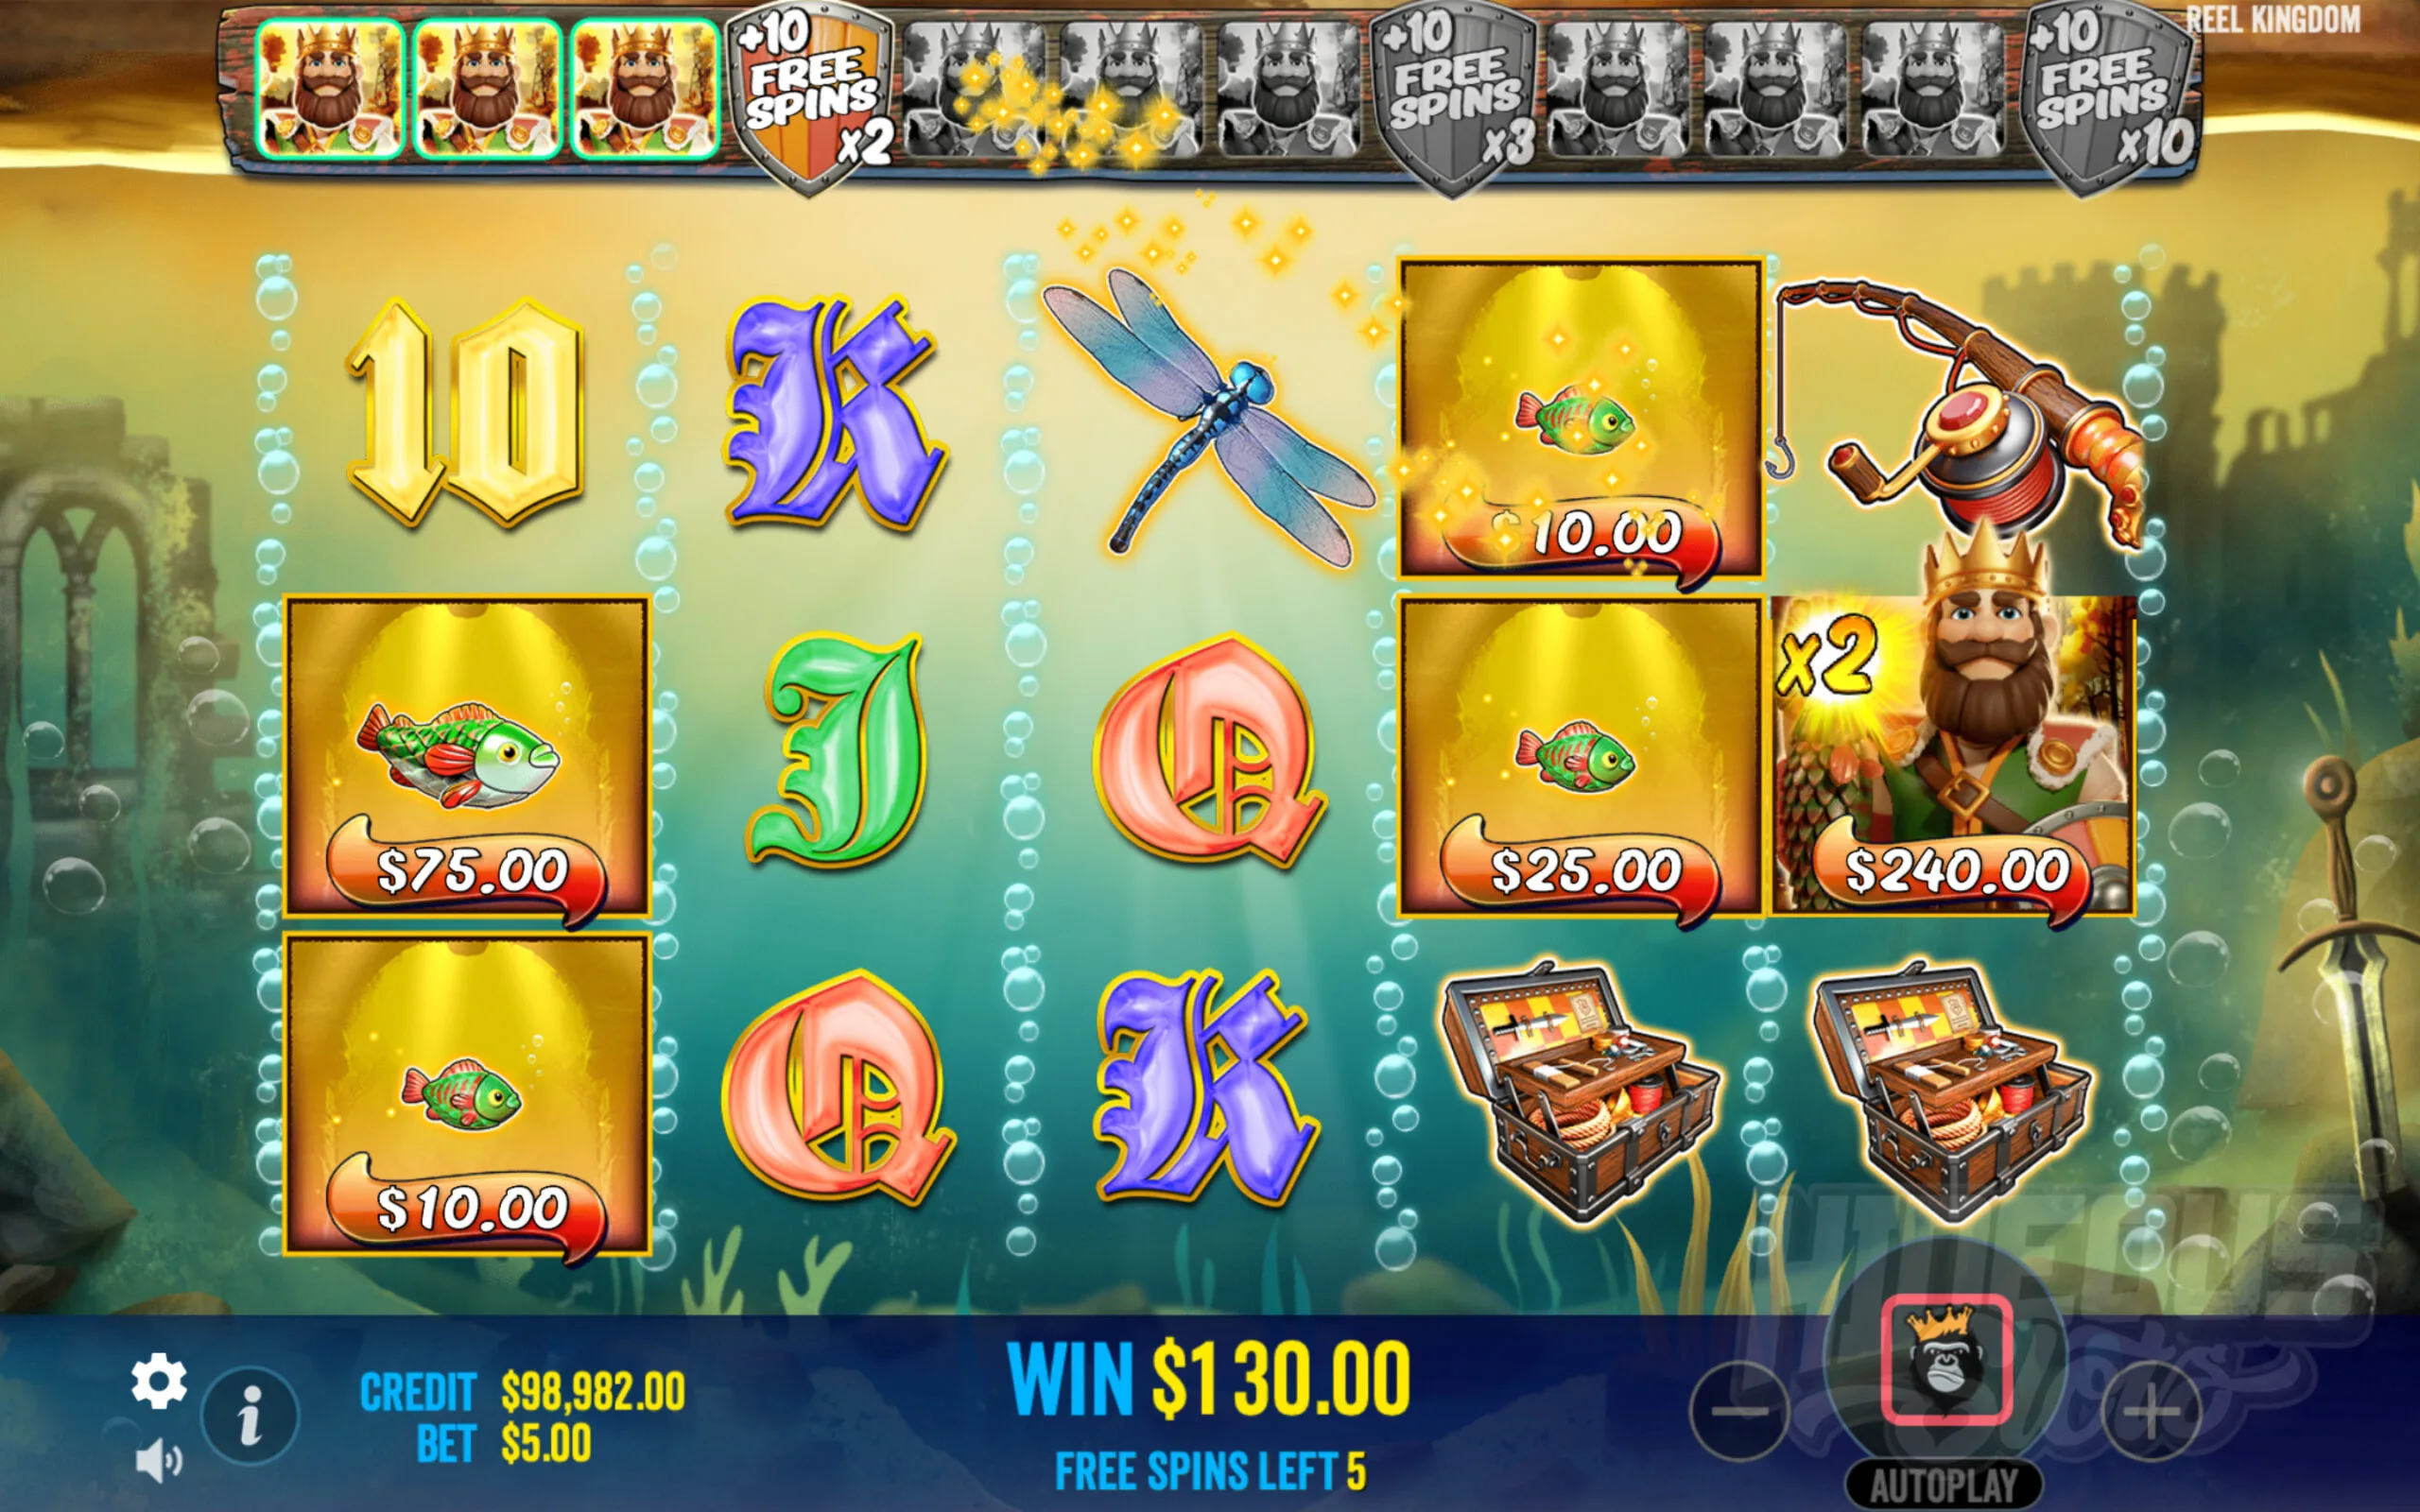 Big Bass Secrets of the Golden Lake Free Spins